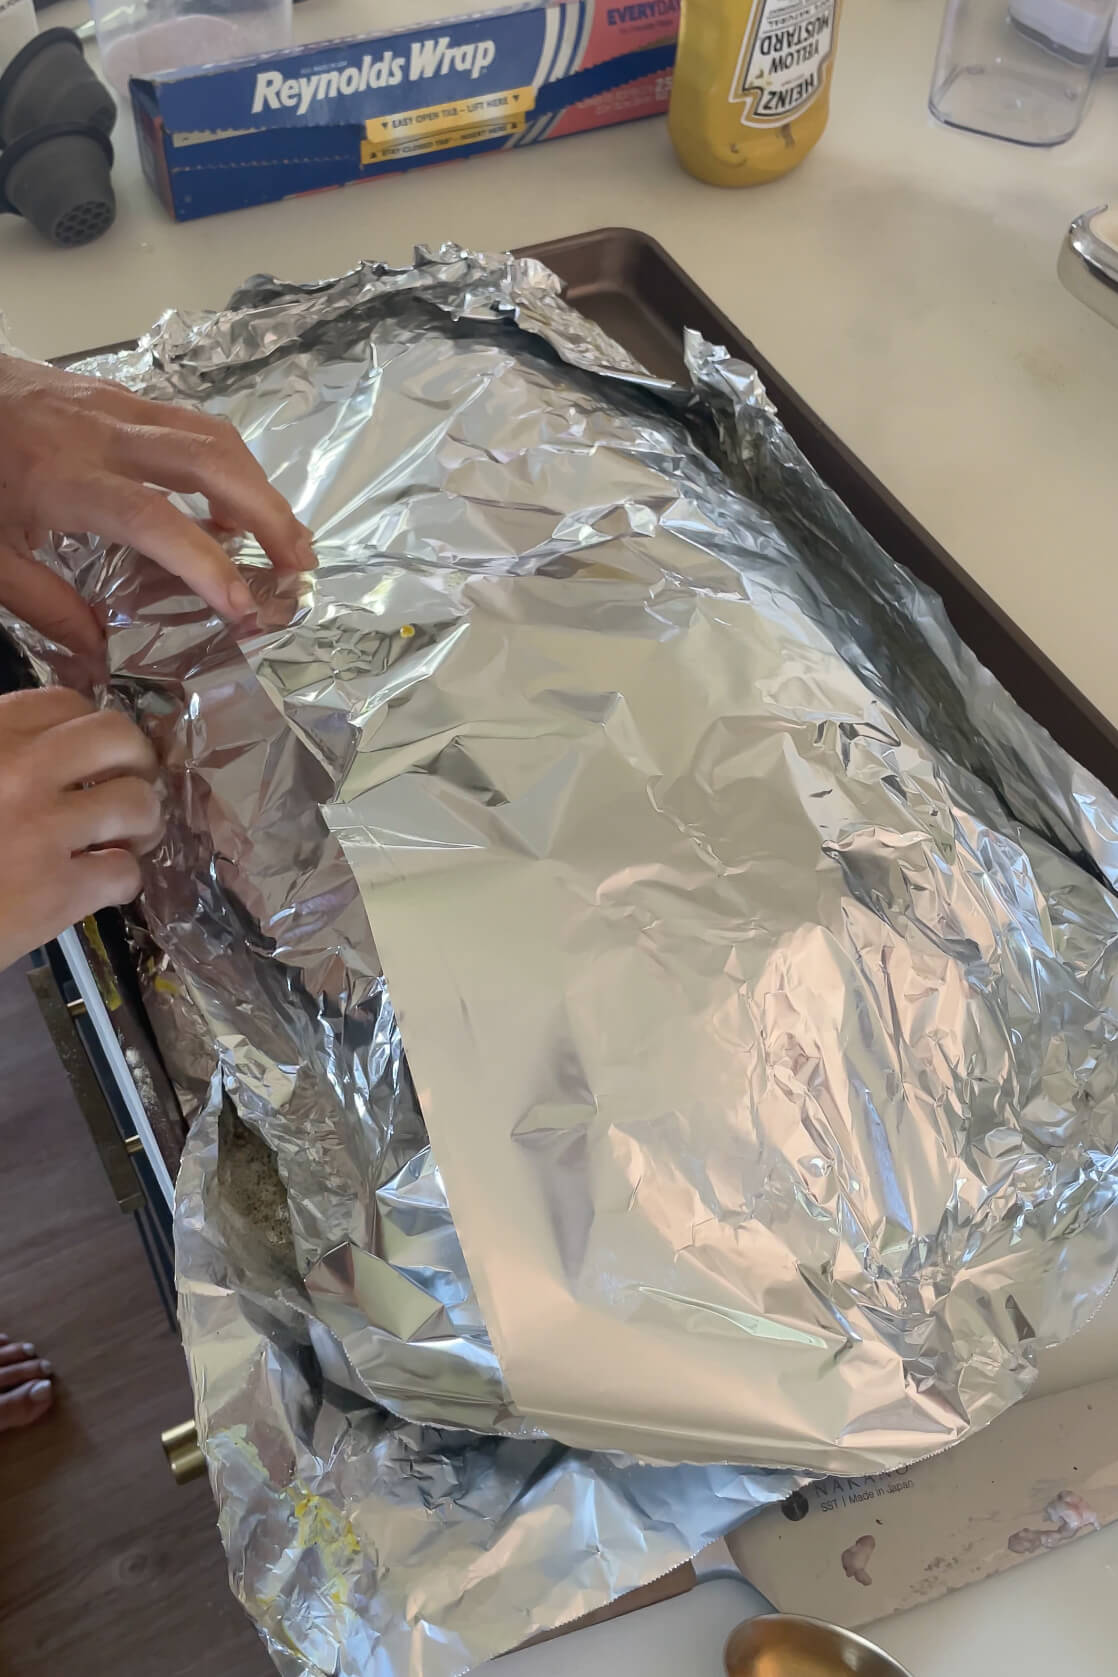 Wrapping a brisket with foil before putting it in a smoker.